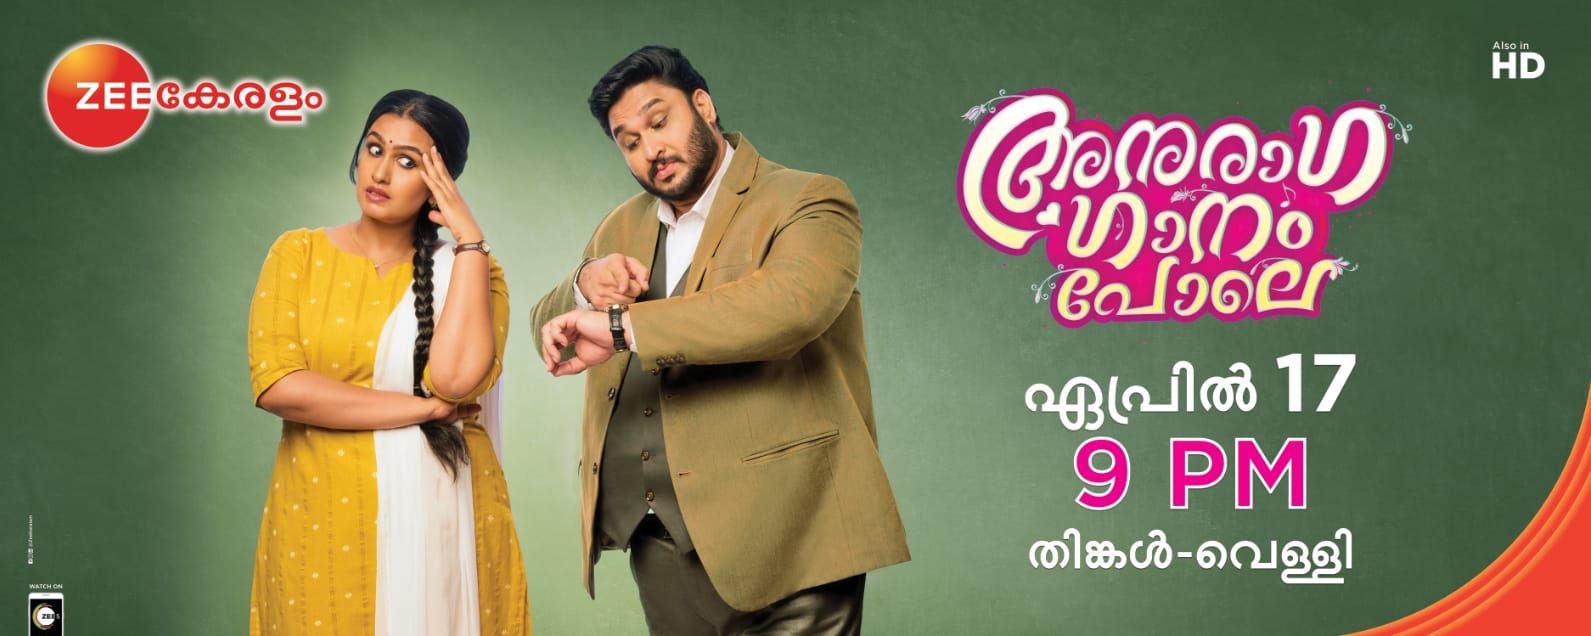 Shyamambaram Serial Launching on 6th February at 09:00 PM on Zee Keralam Channel 5